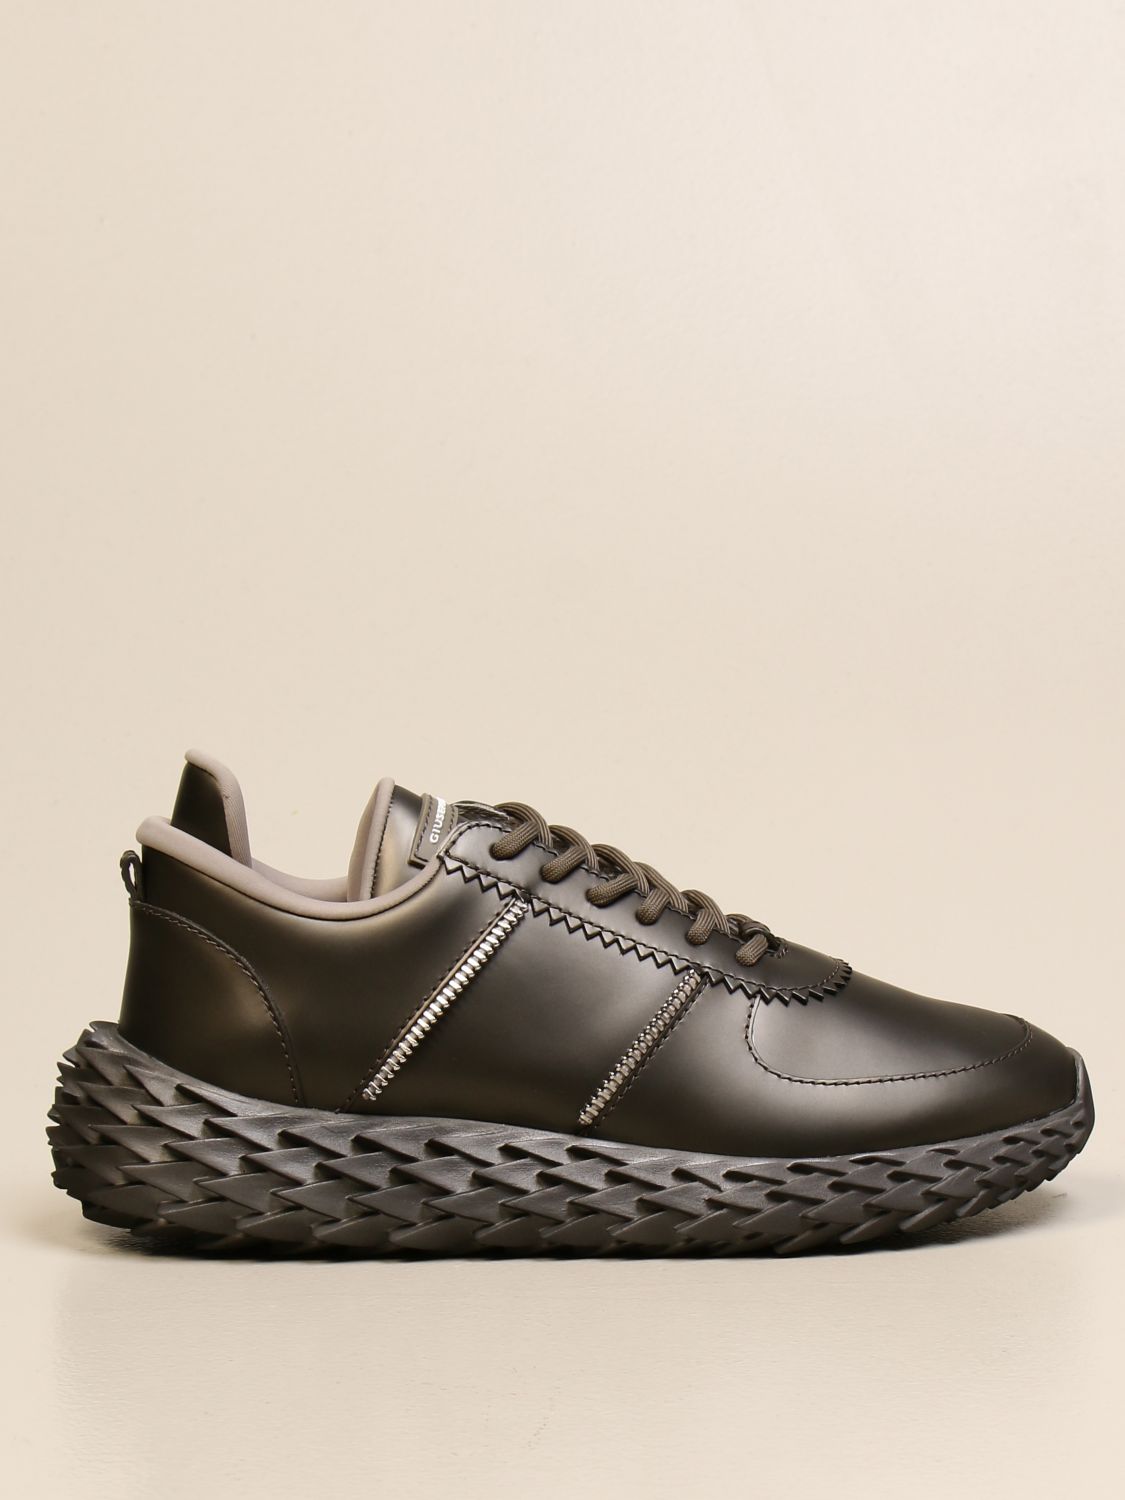 Lodge Besættelse Festival Giuseppe Zanotti Outlet: sneakers for man - Charcoal | Giuseppe Zanotti  sneakers RU00091 online at GIGLIO.COM